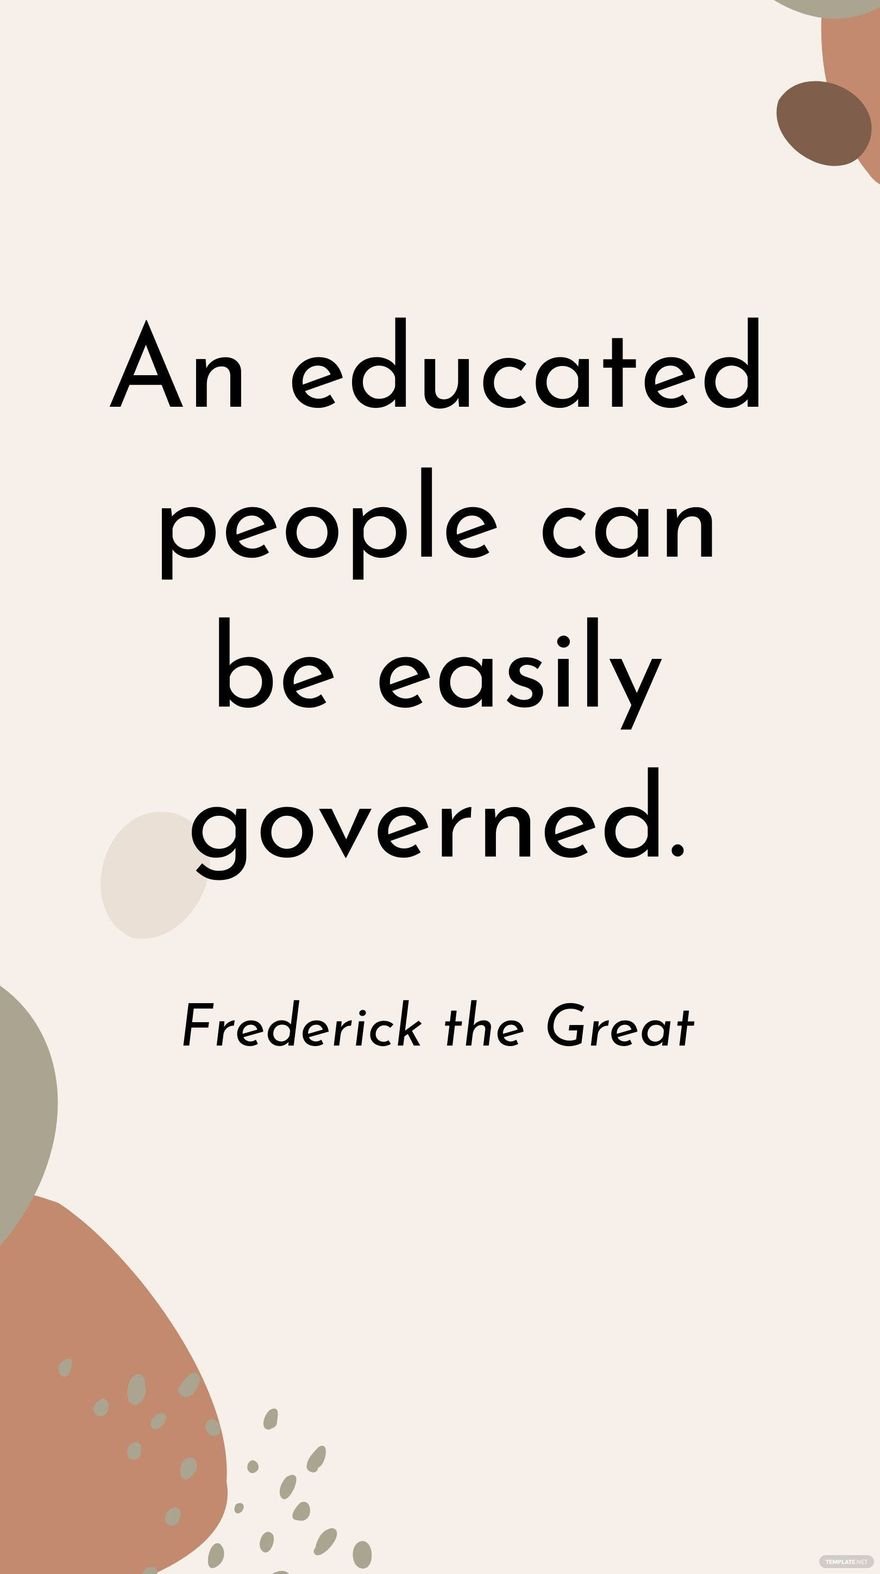 Frederick the Great - An educated people can be easily governed.